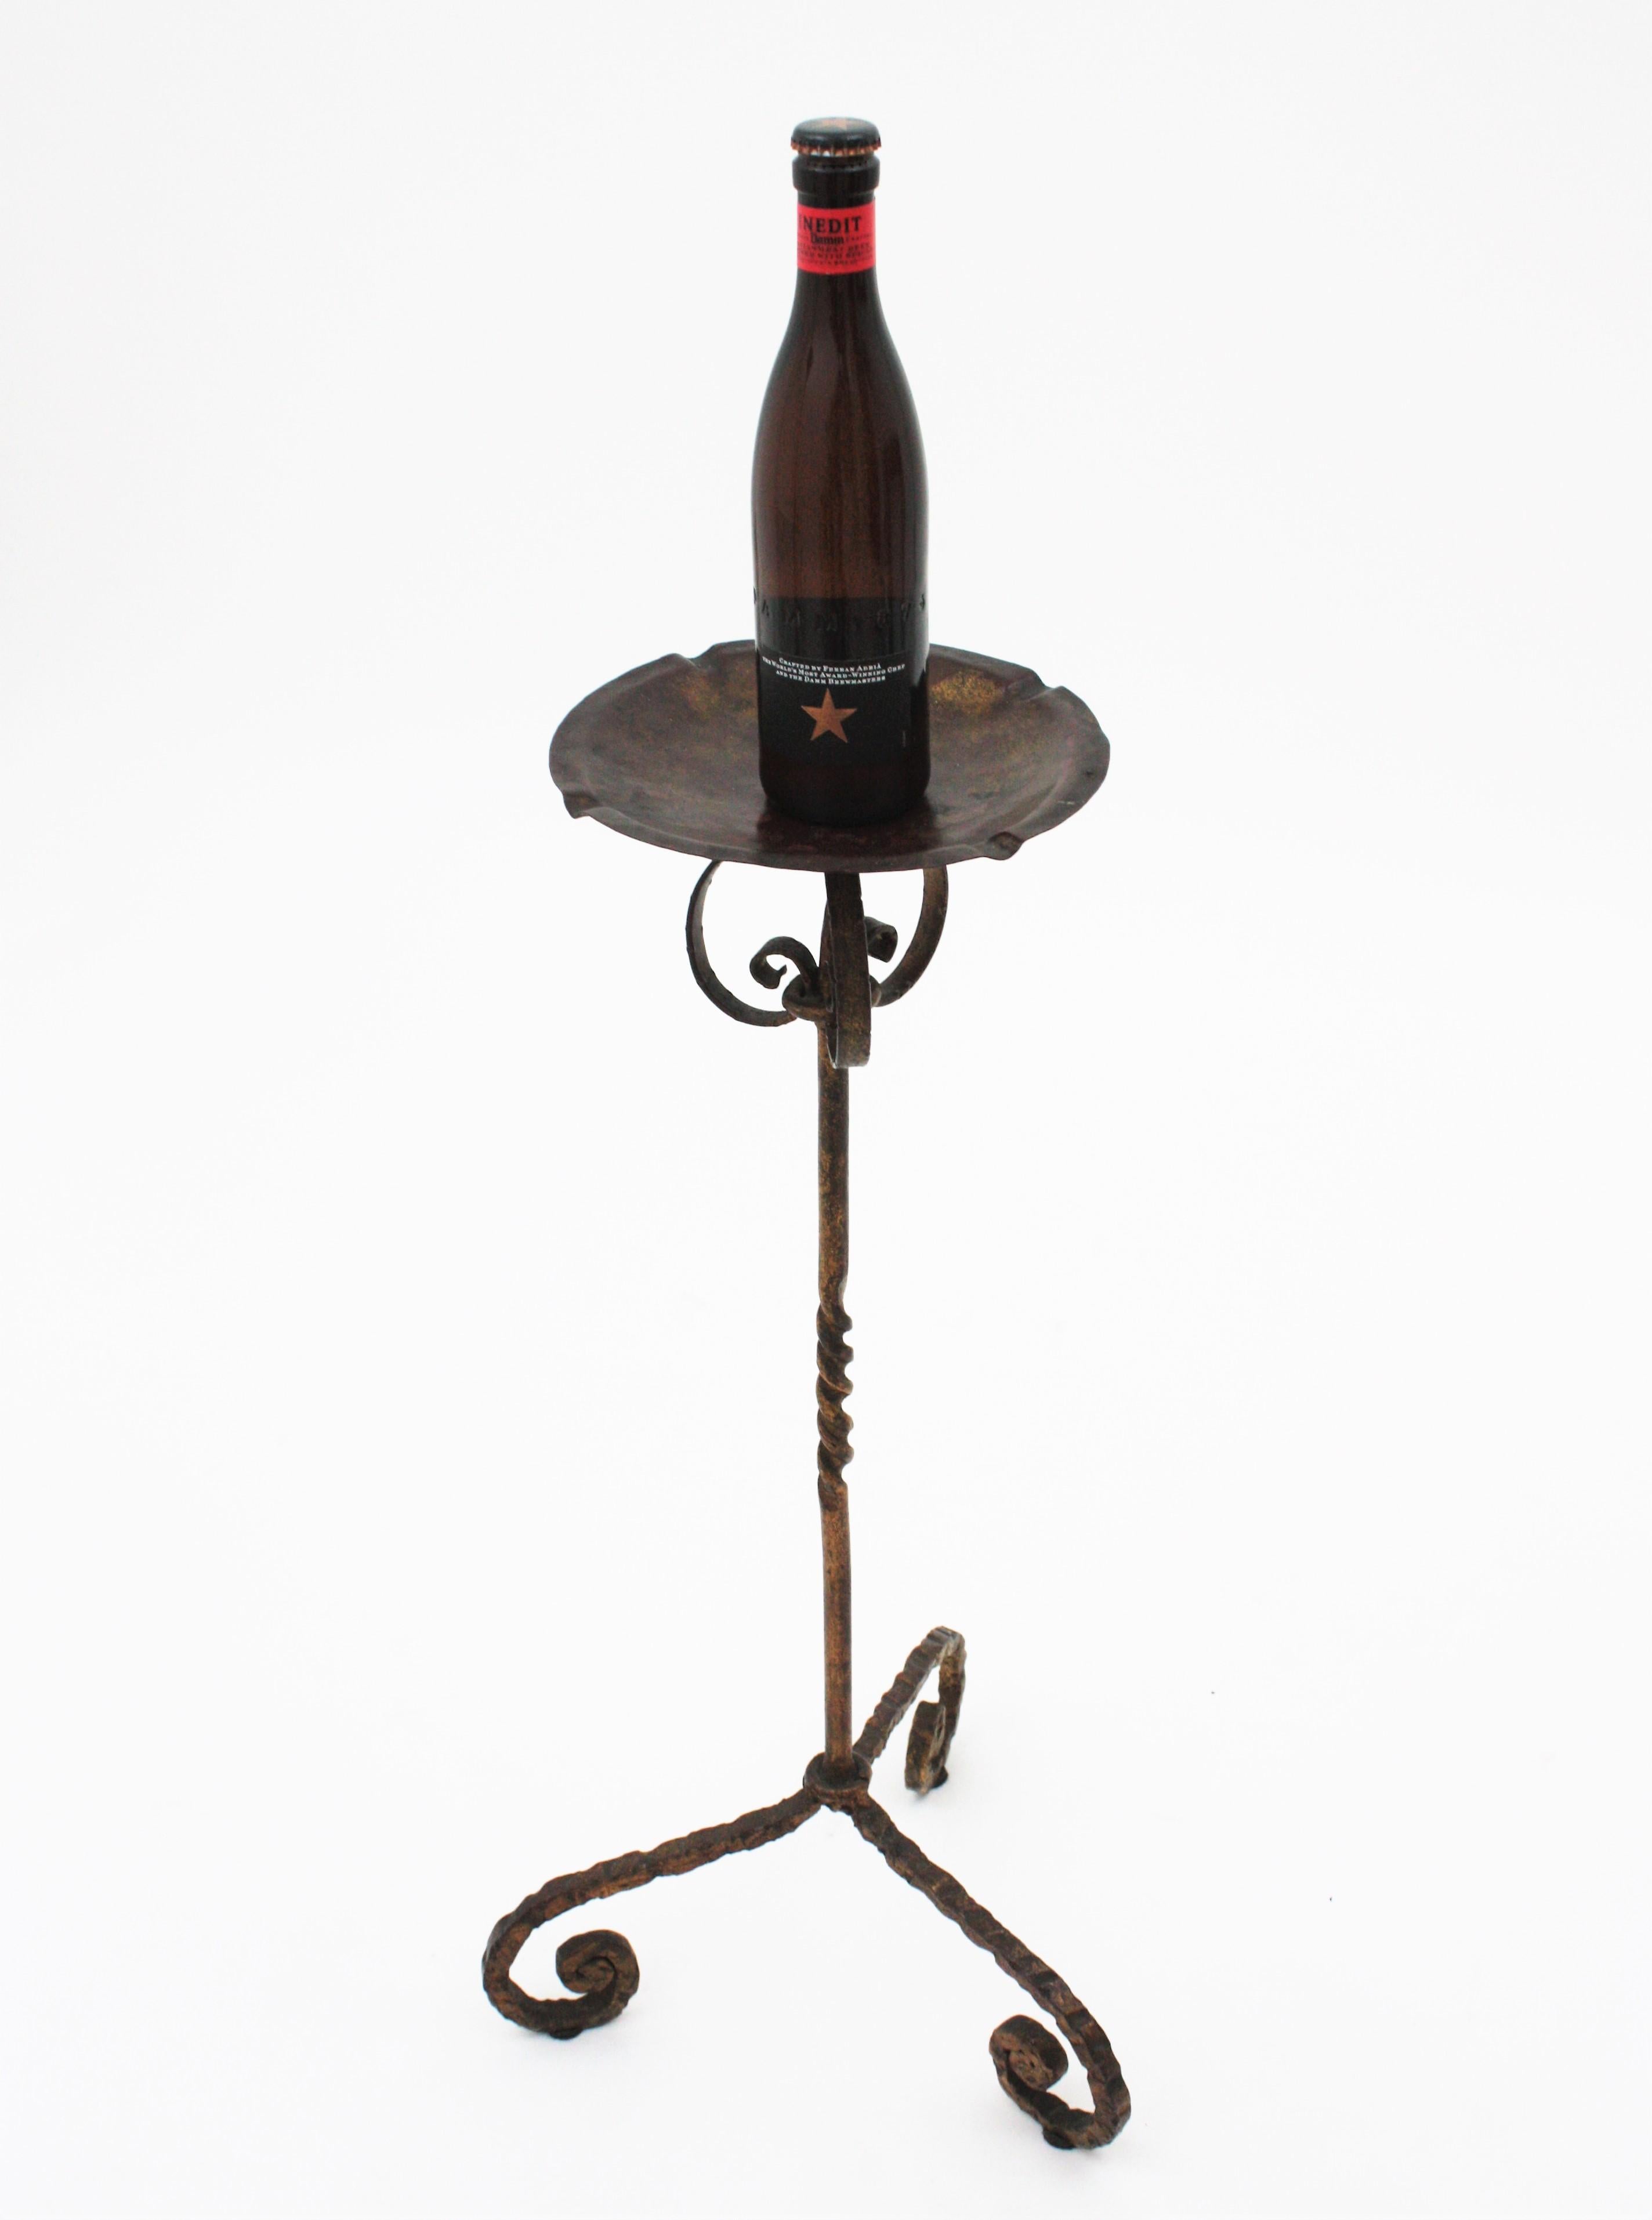 Spanish wrought iron floor ashtray or drinks / cocktails table standing on a tripod base, Spain, 1940s.
Handcrafted in wrought iron. The top stands on a tripod base with twisting details on the stem and scroll endeded feet. Terrific parcel-gilt